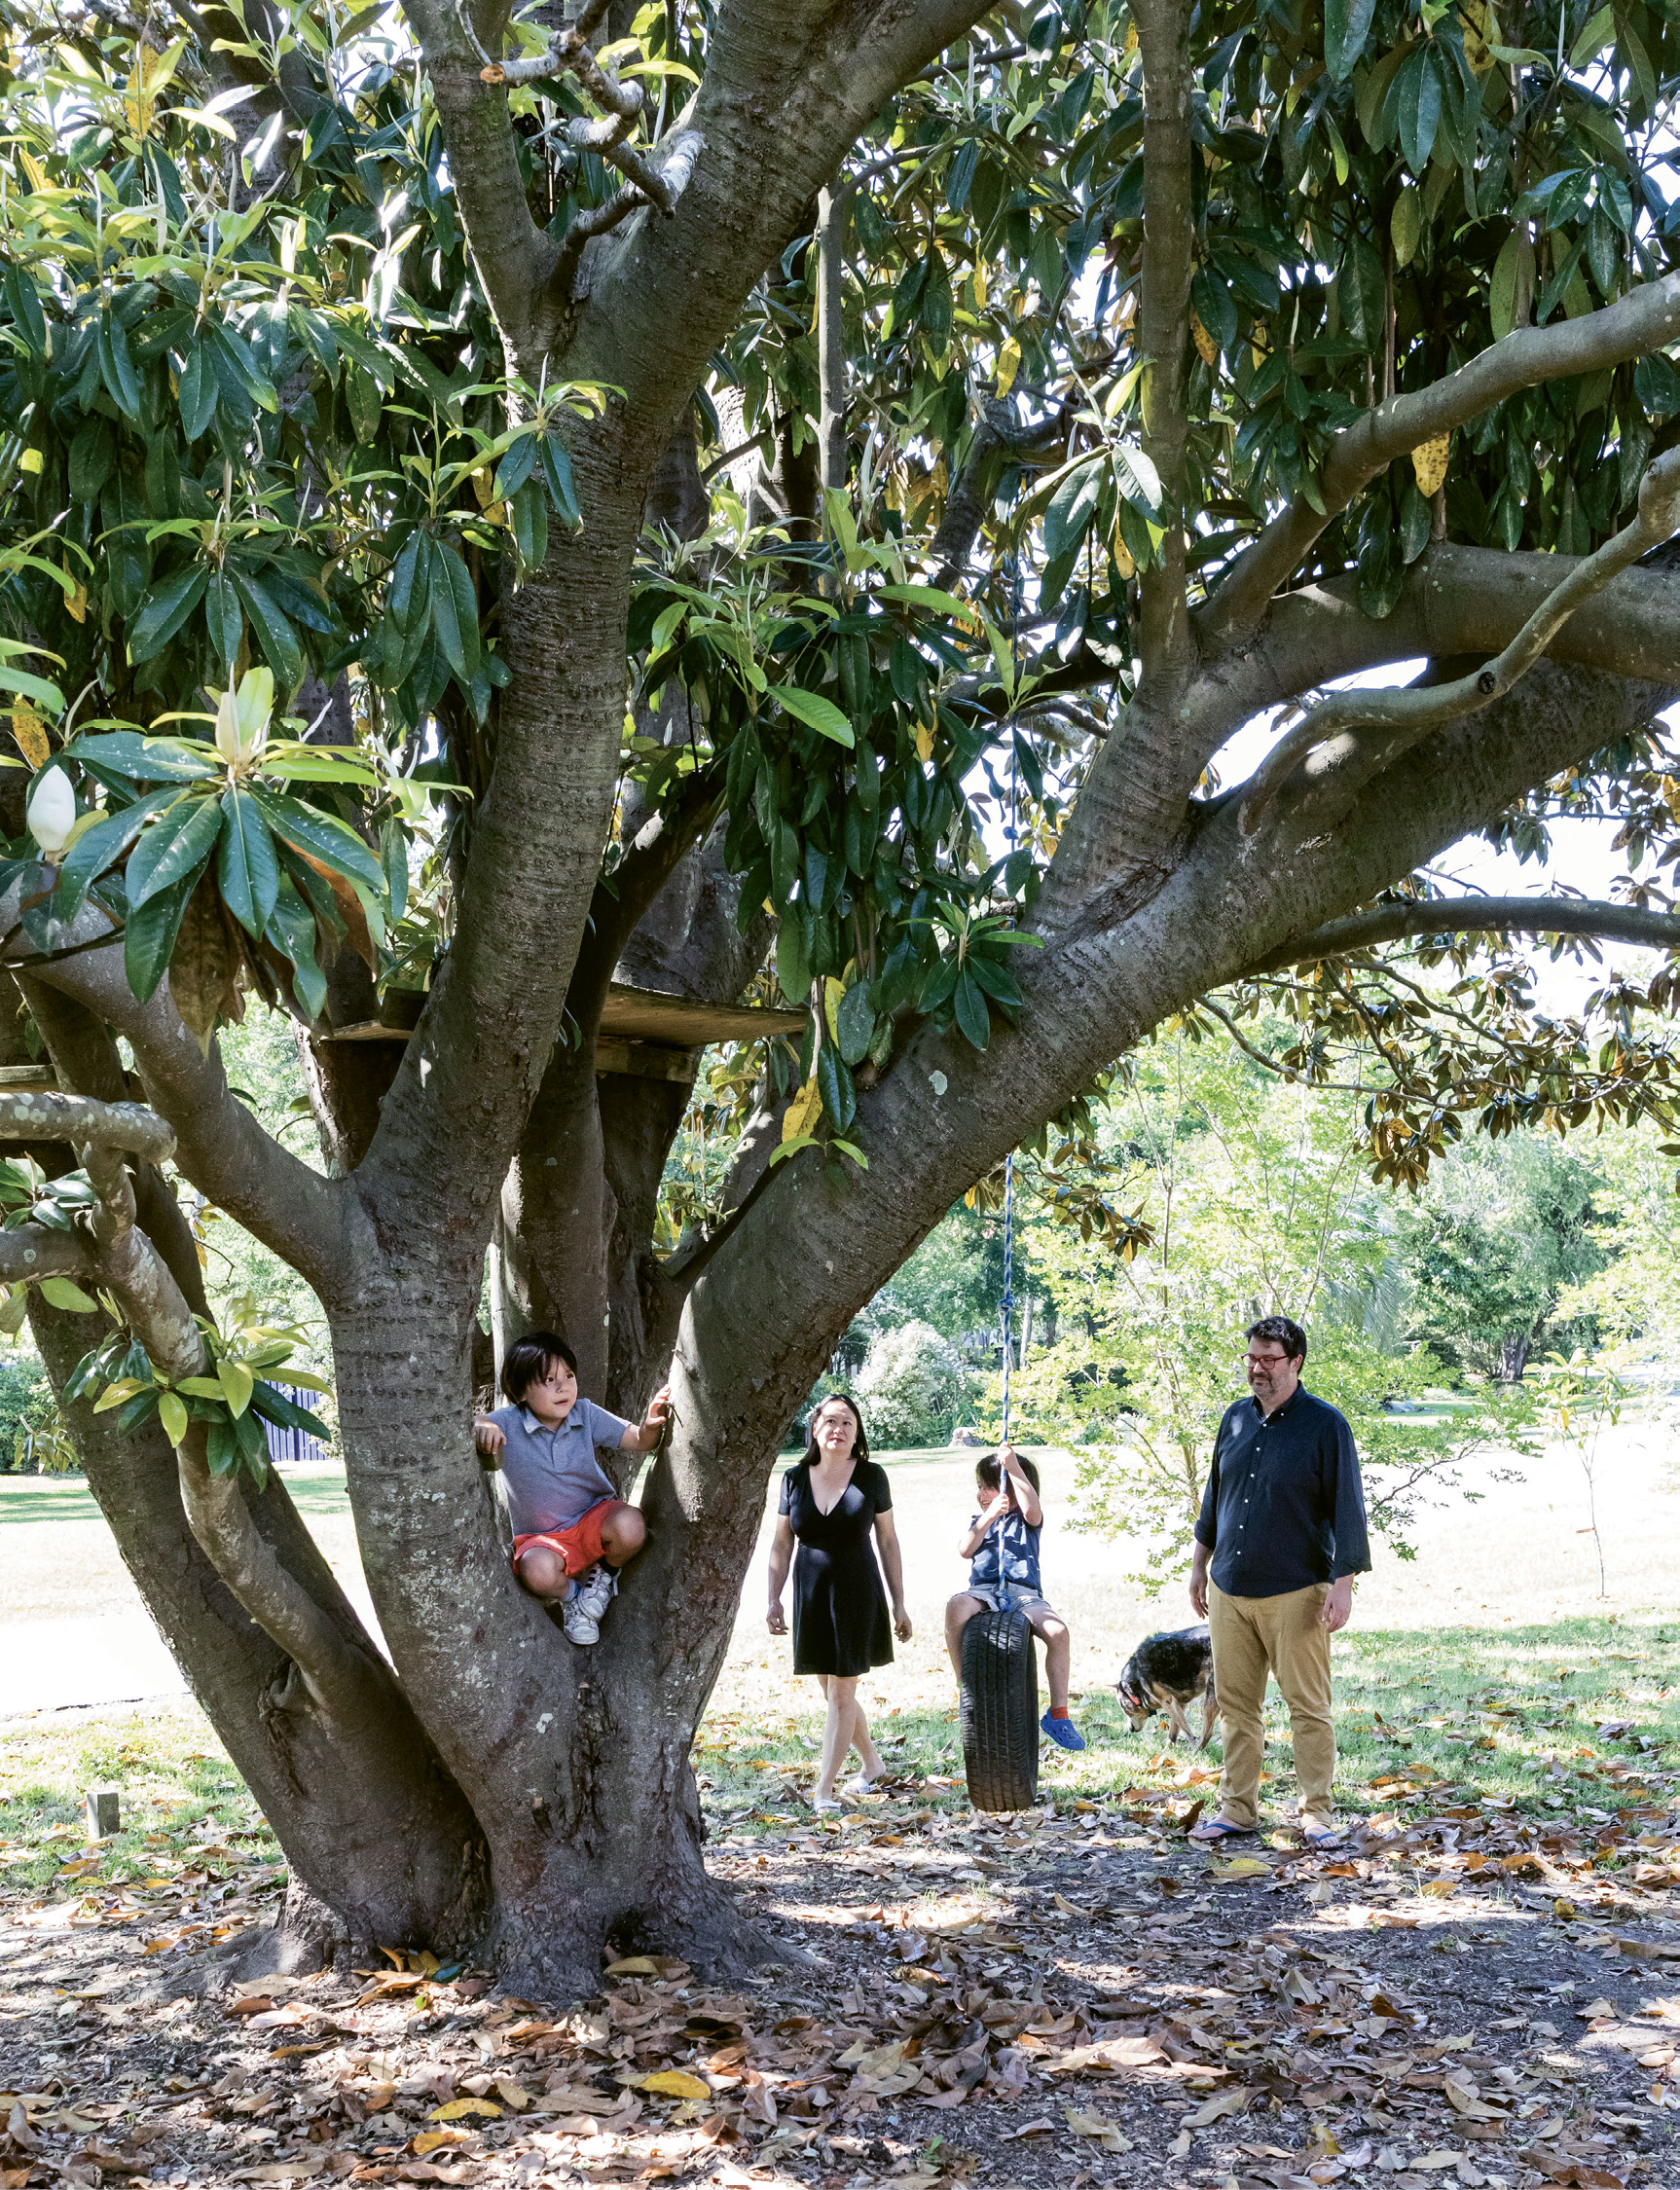 A massive magnolia is one of many established trees that flourish in Wong and husband John David Harmon’s yard. The 12 fruit trees provide inspiration for Wong’s work and a playground for her boys.